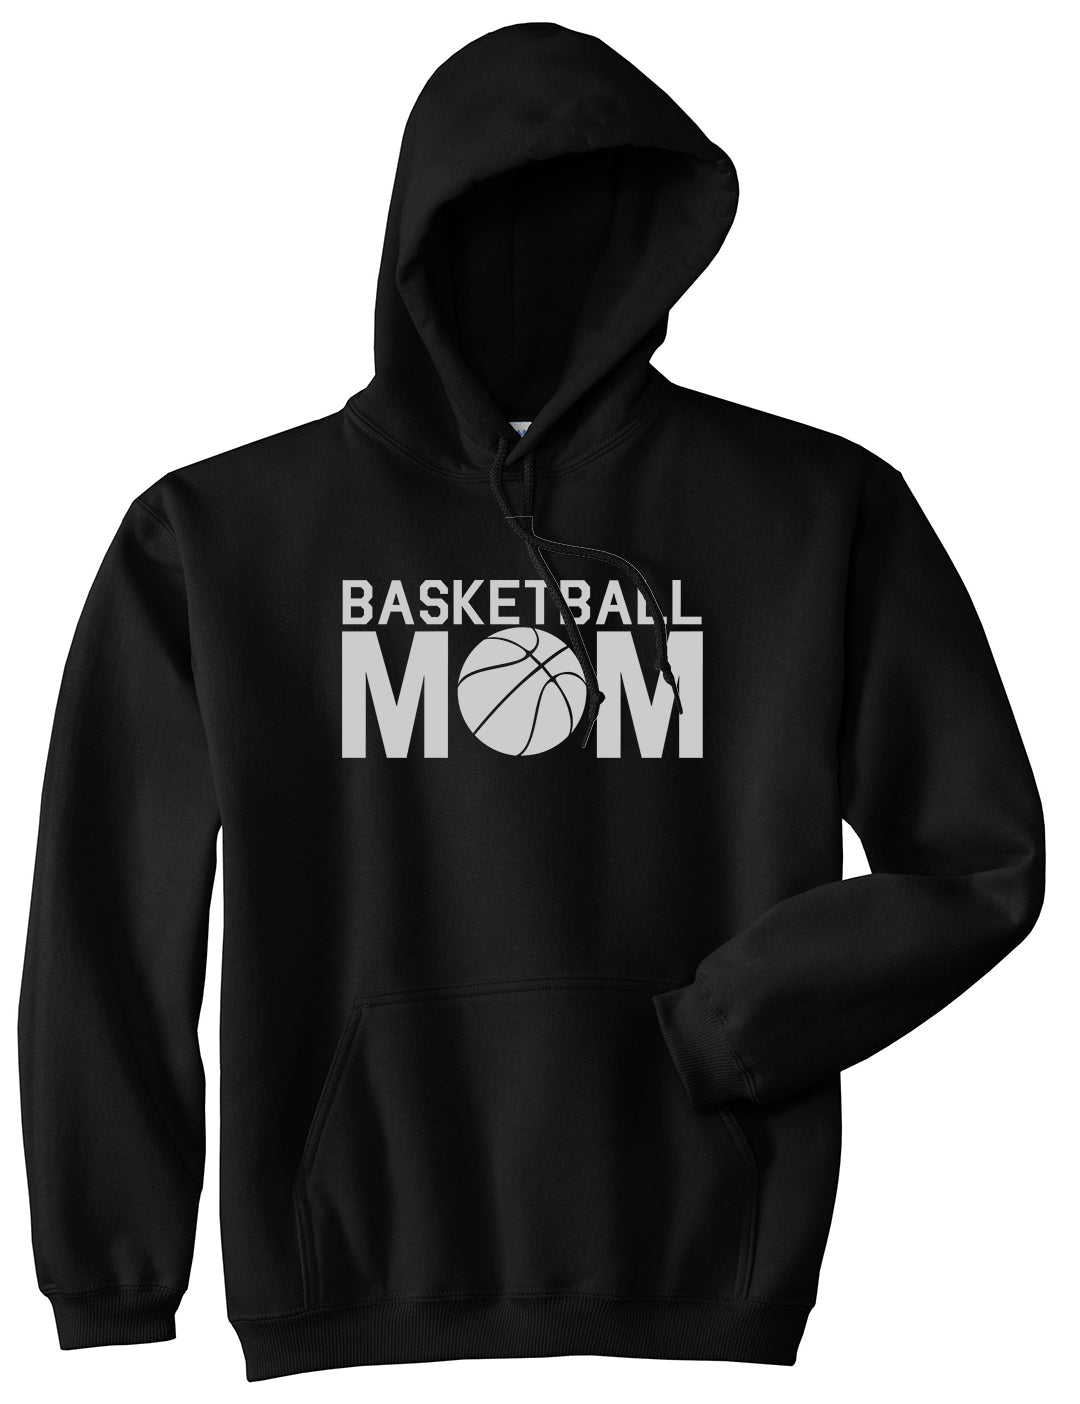 Basketball Mom Black Pullover Hoodie by Kings Of NY